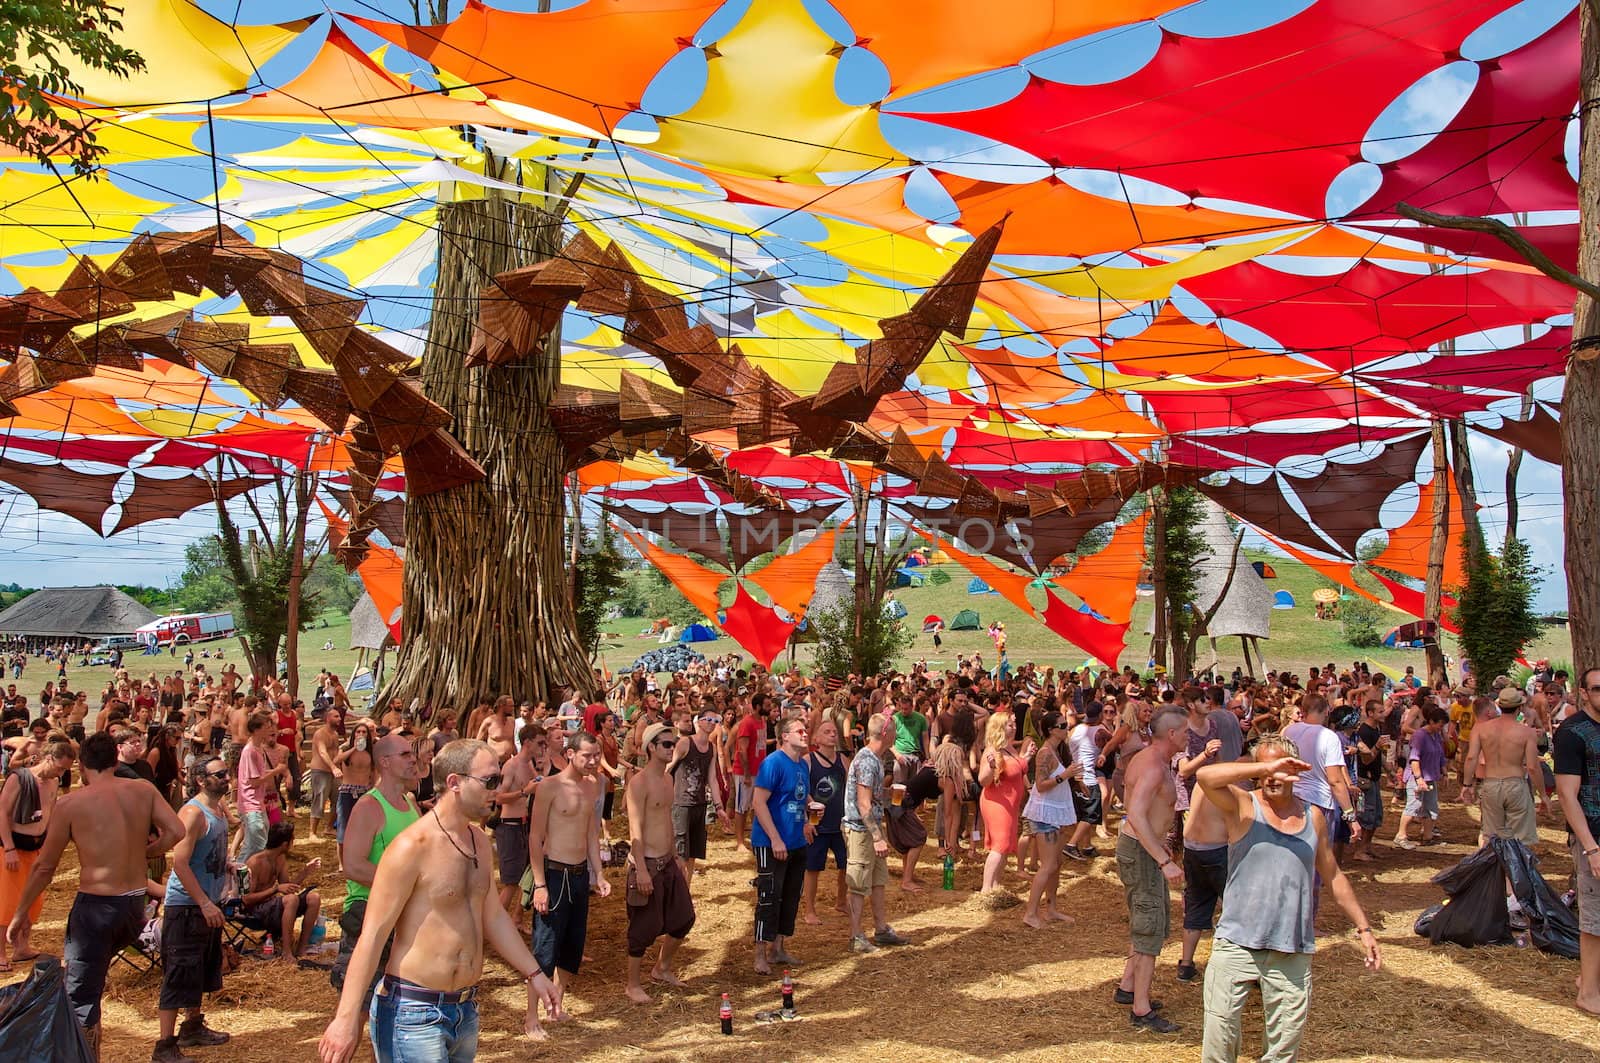 OZORA, HUNGARY - AUGUST 01: People dancing on Ozora Festival, on by anderm